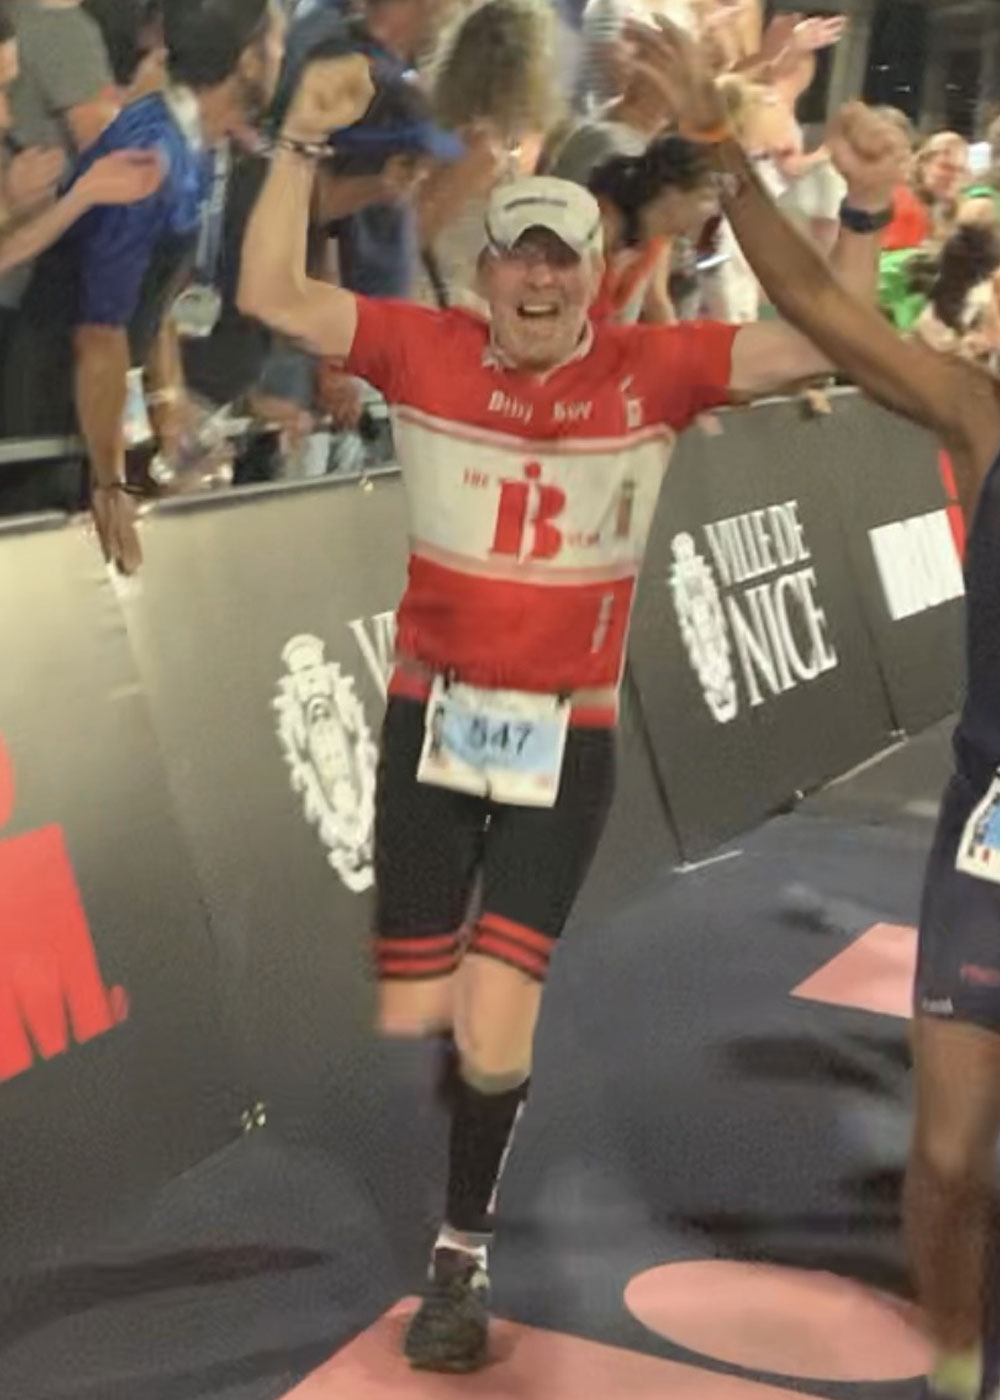 Man in cycling gear running and cheering